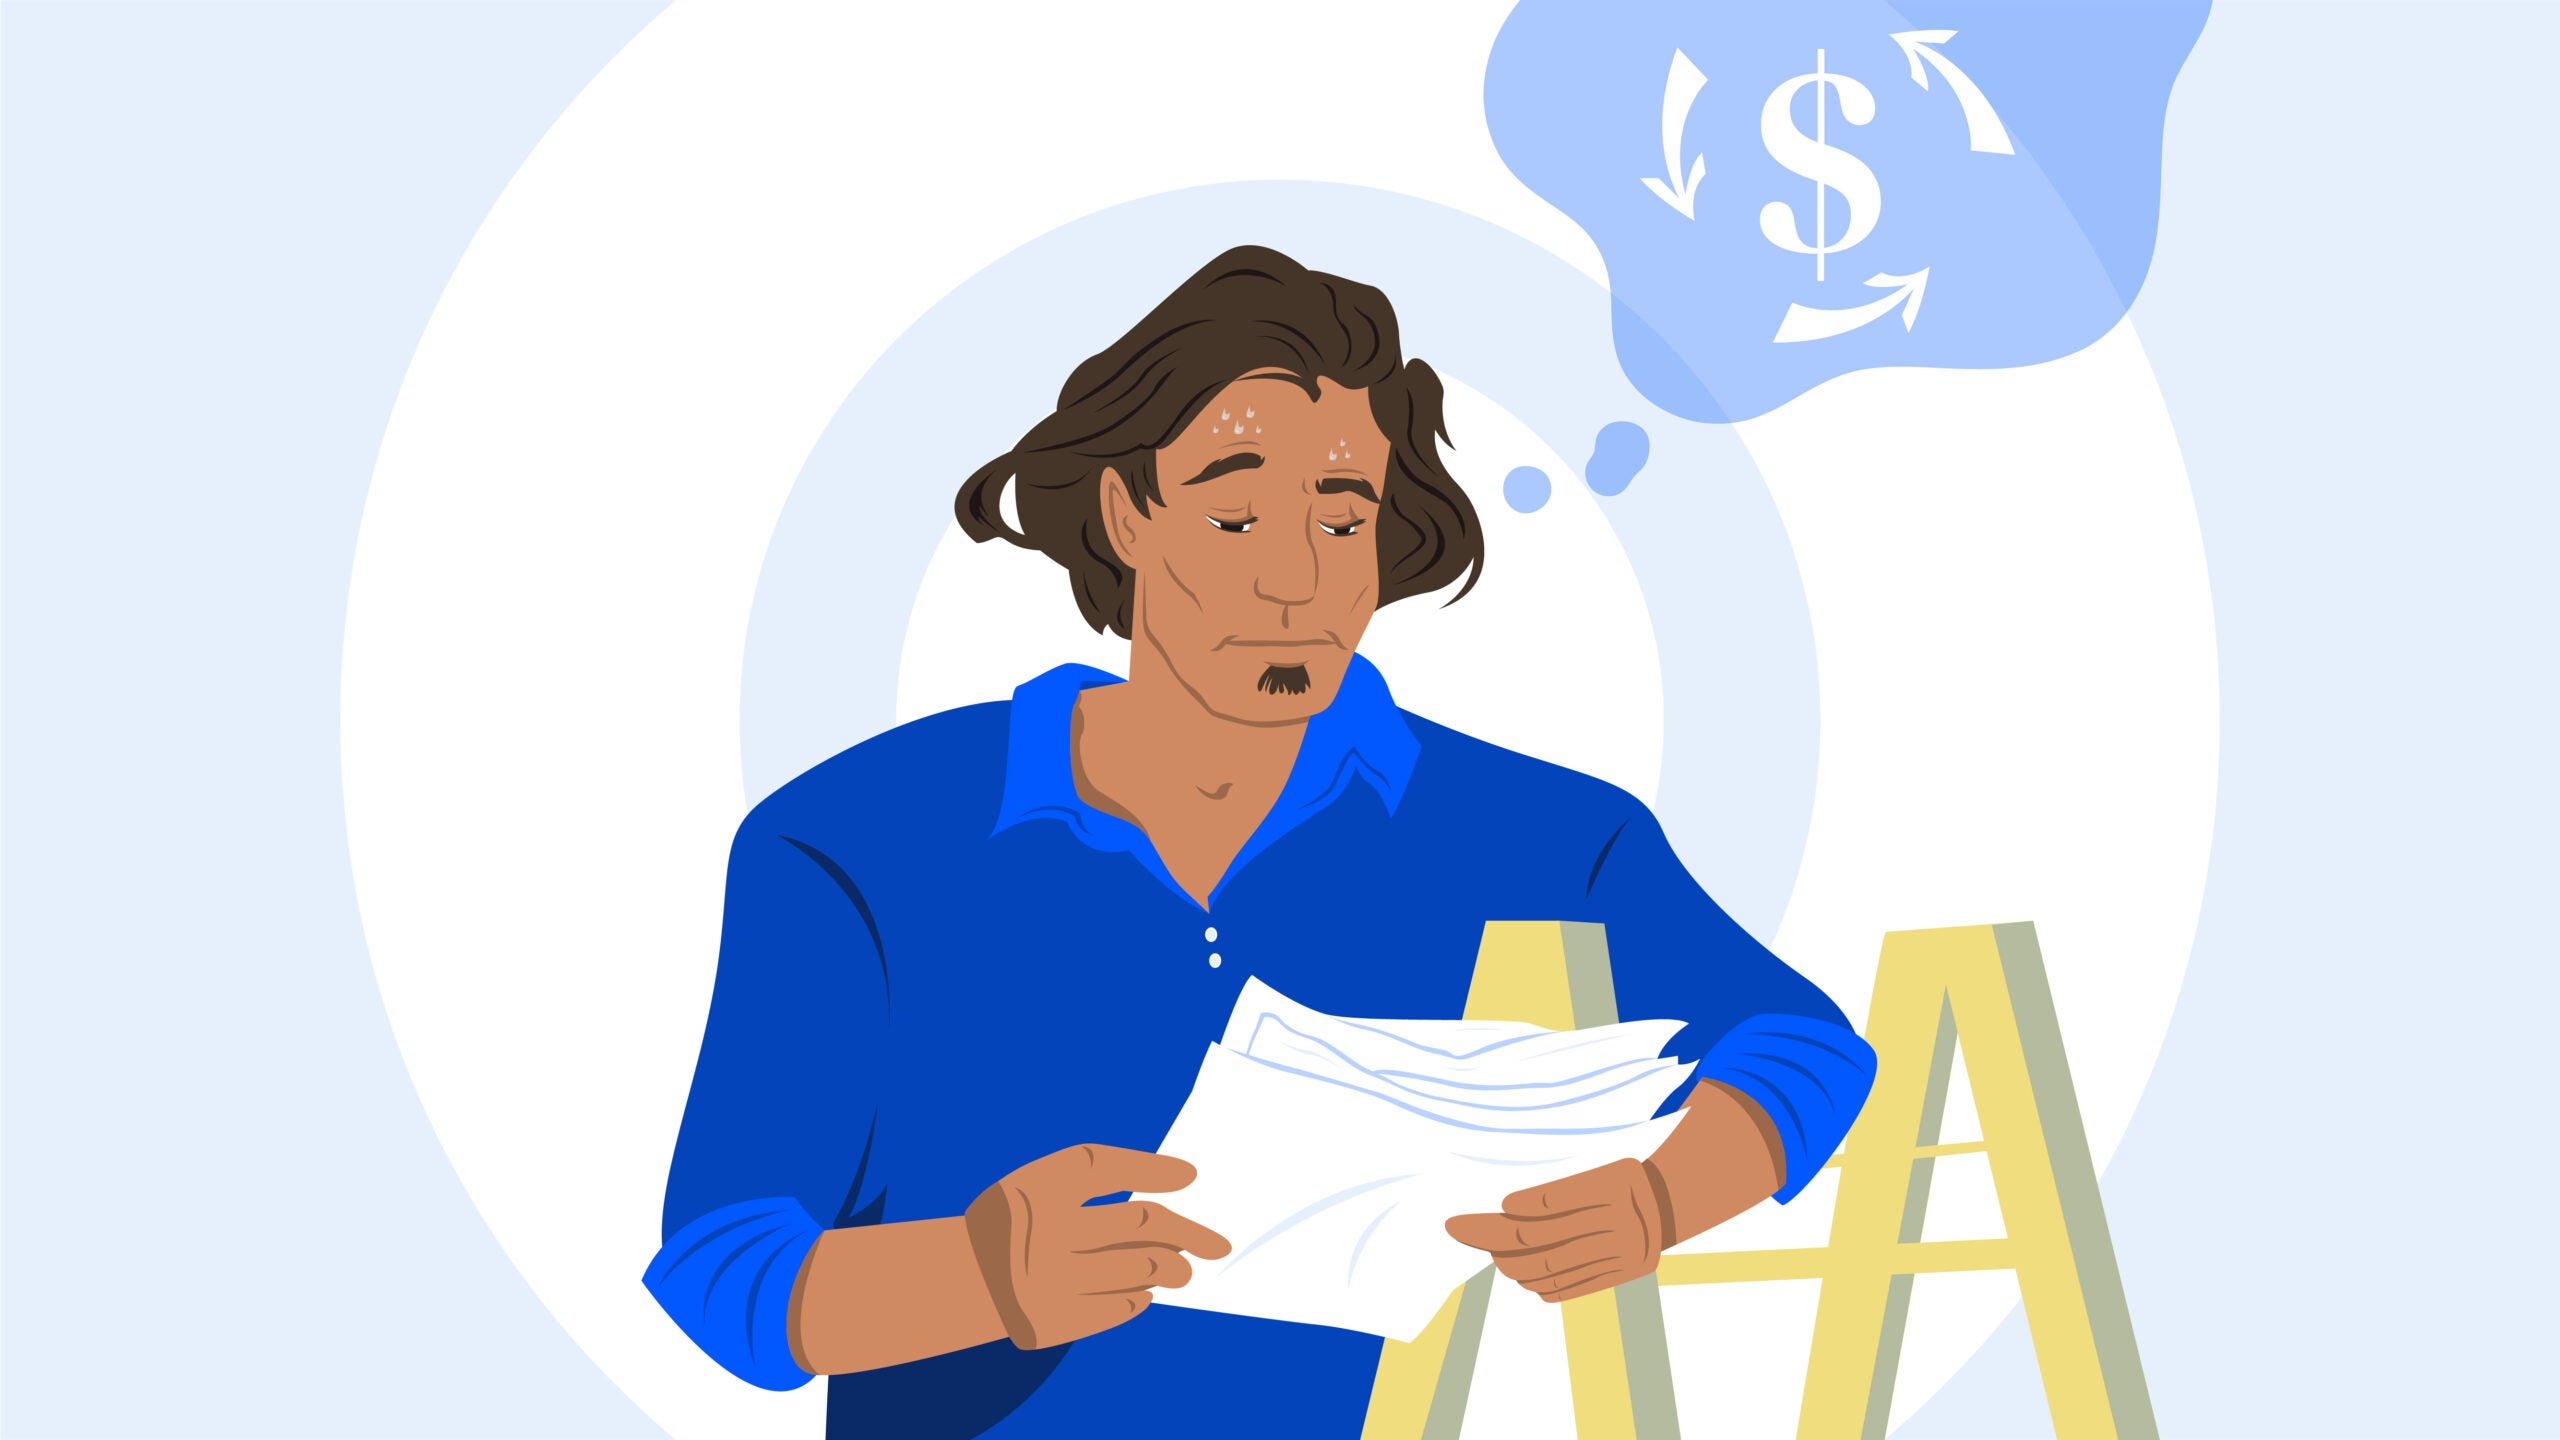 Illustration depicting person looking stressed at paperwork with a ladder